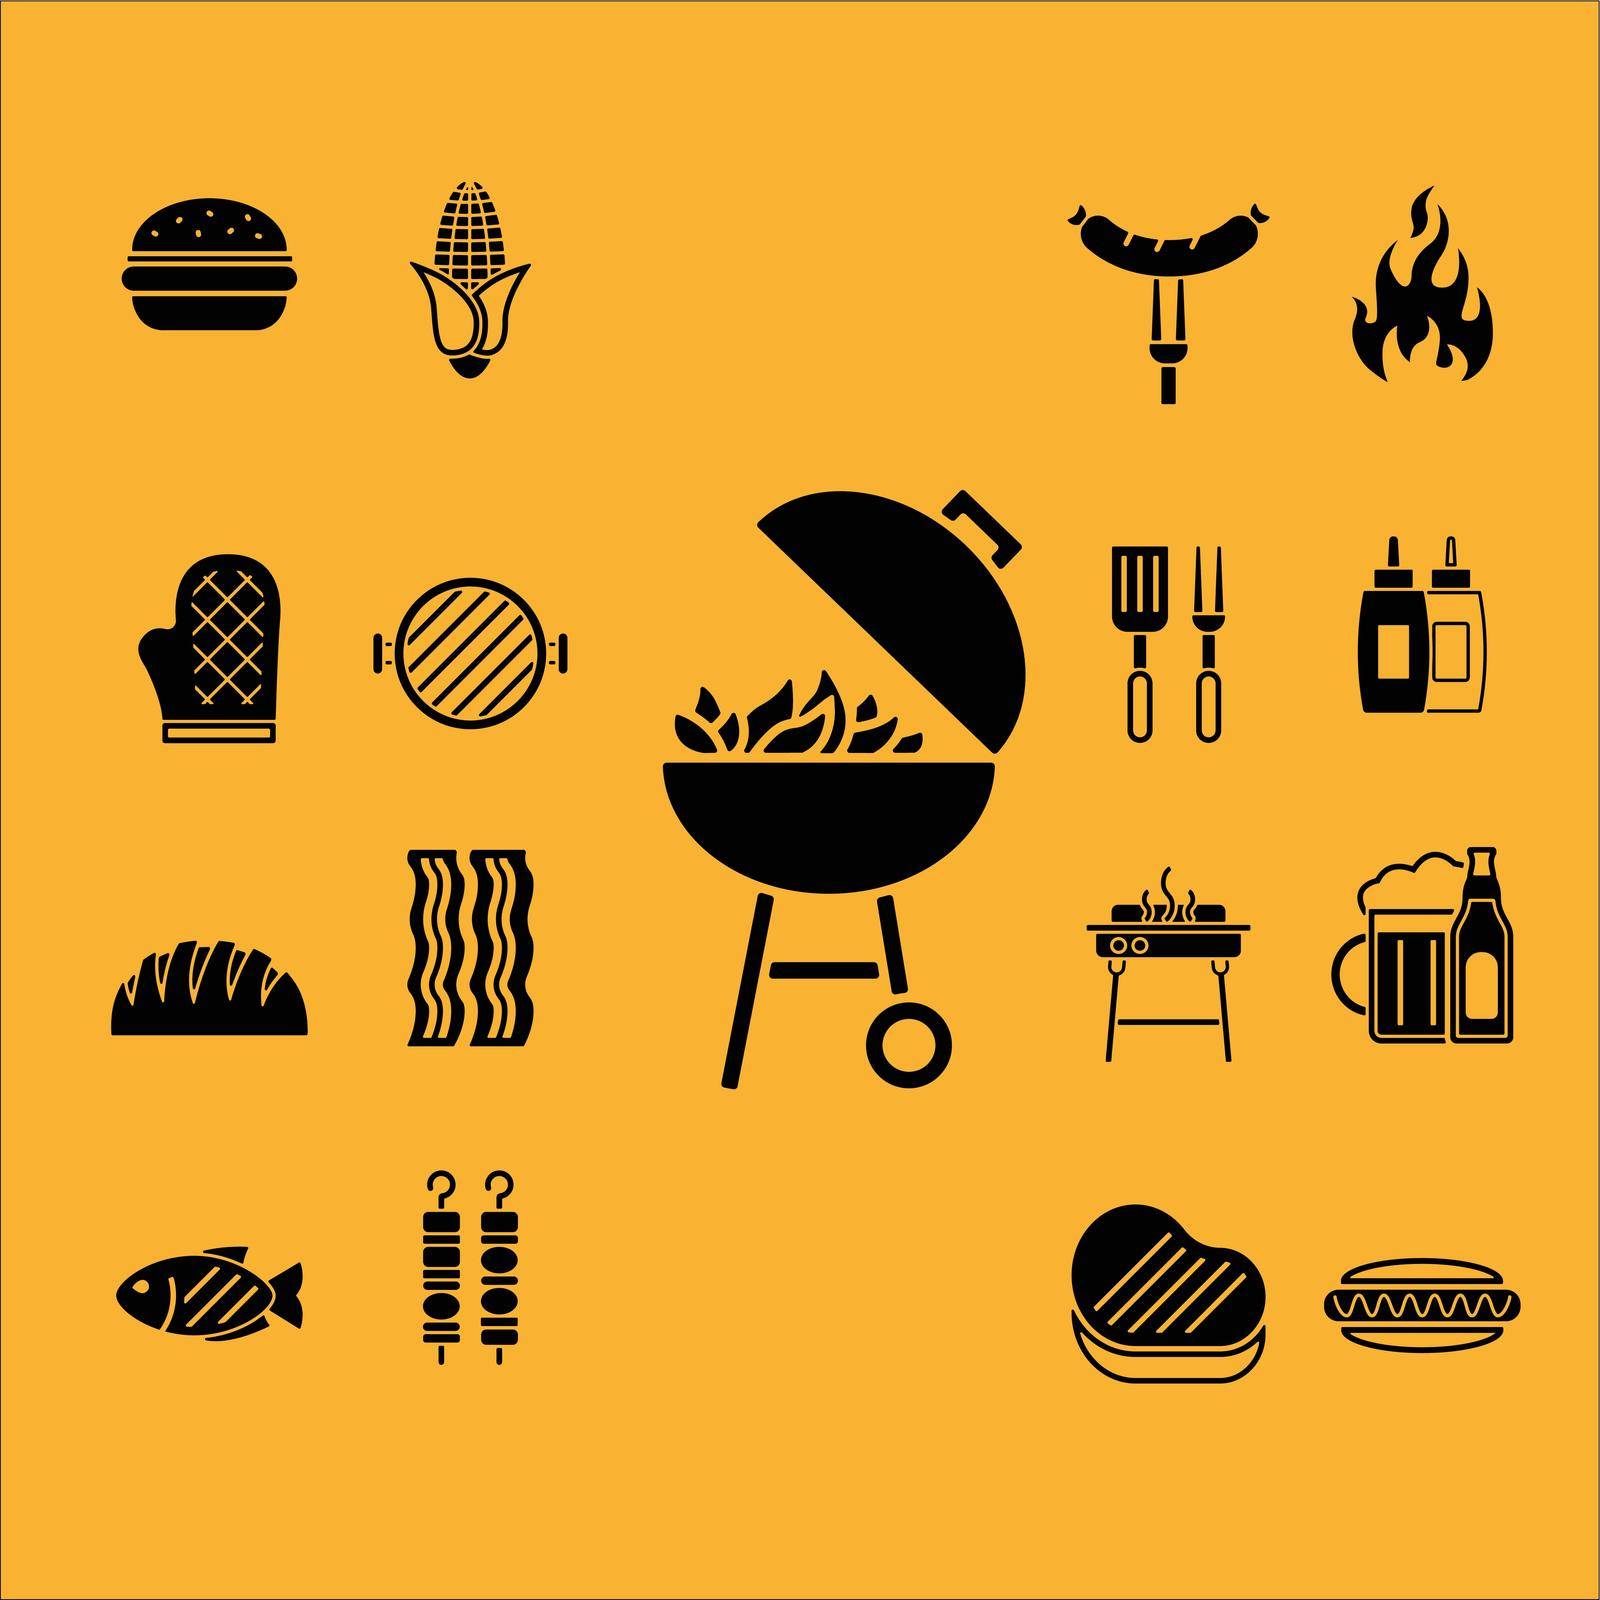 you can use Set of barbecue icons isolate on yellow background to design banners, posters, backgrounds, ...etc.